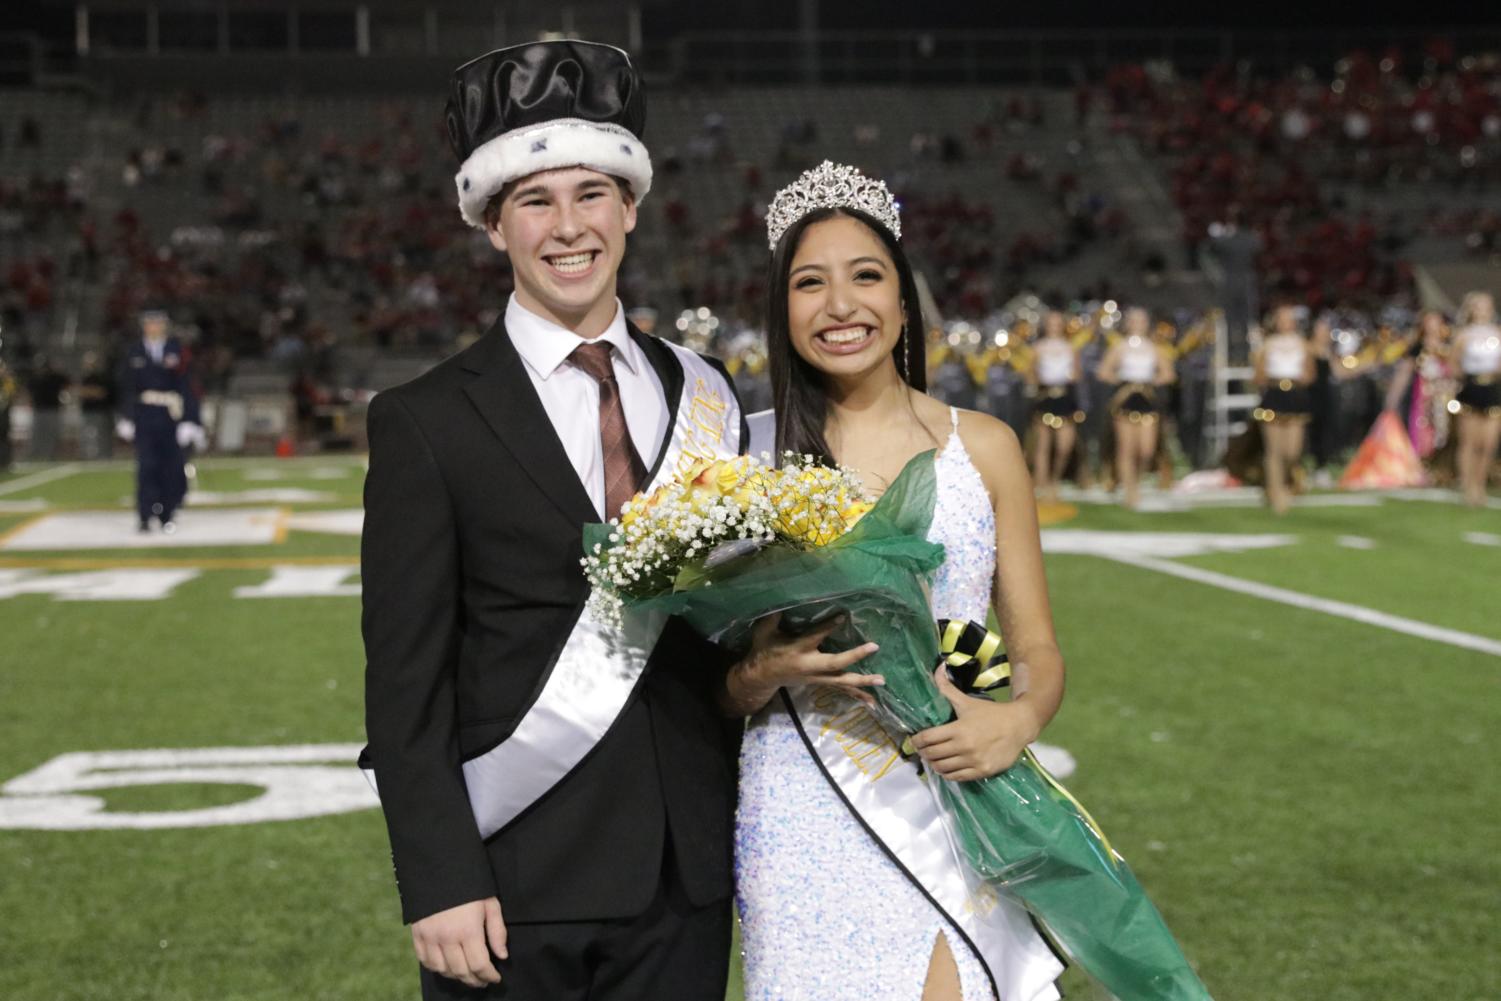 Snook crowns Parker Homecoming Queen - Gulf Coast Media